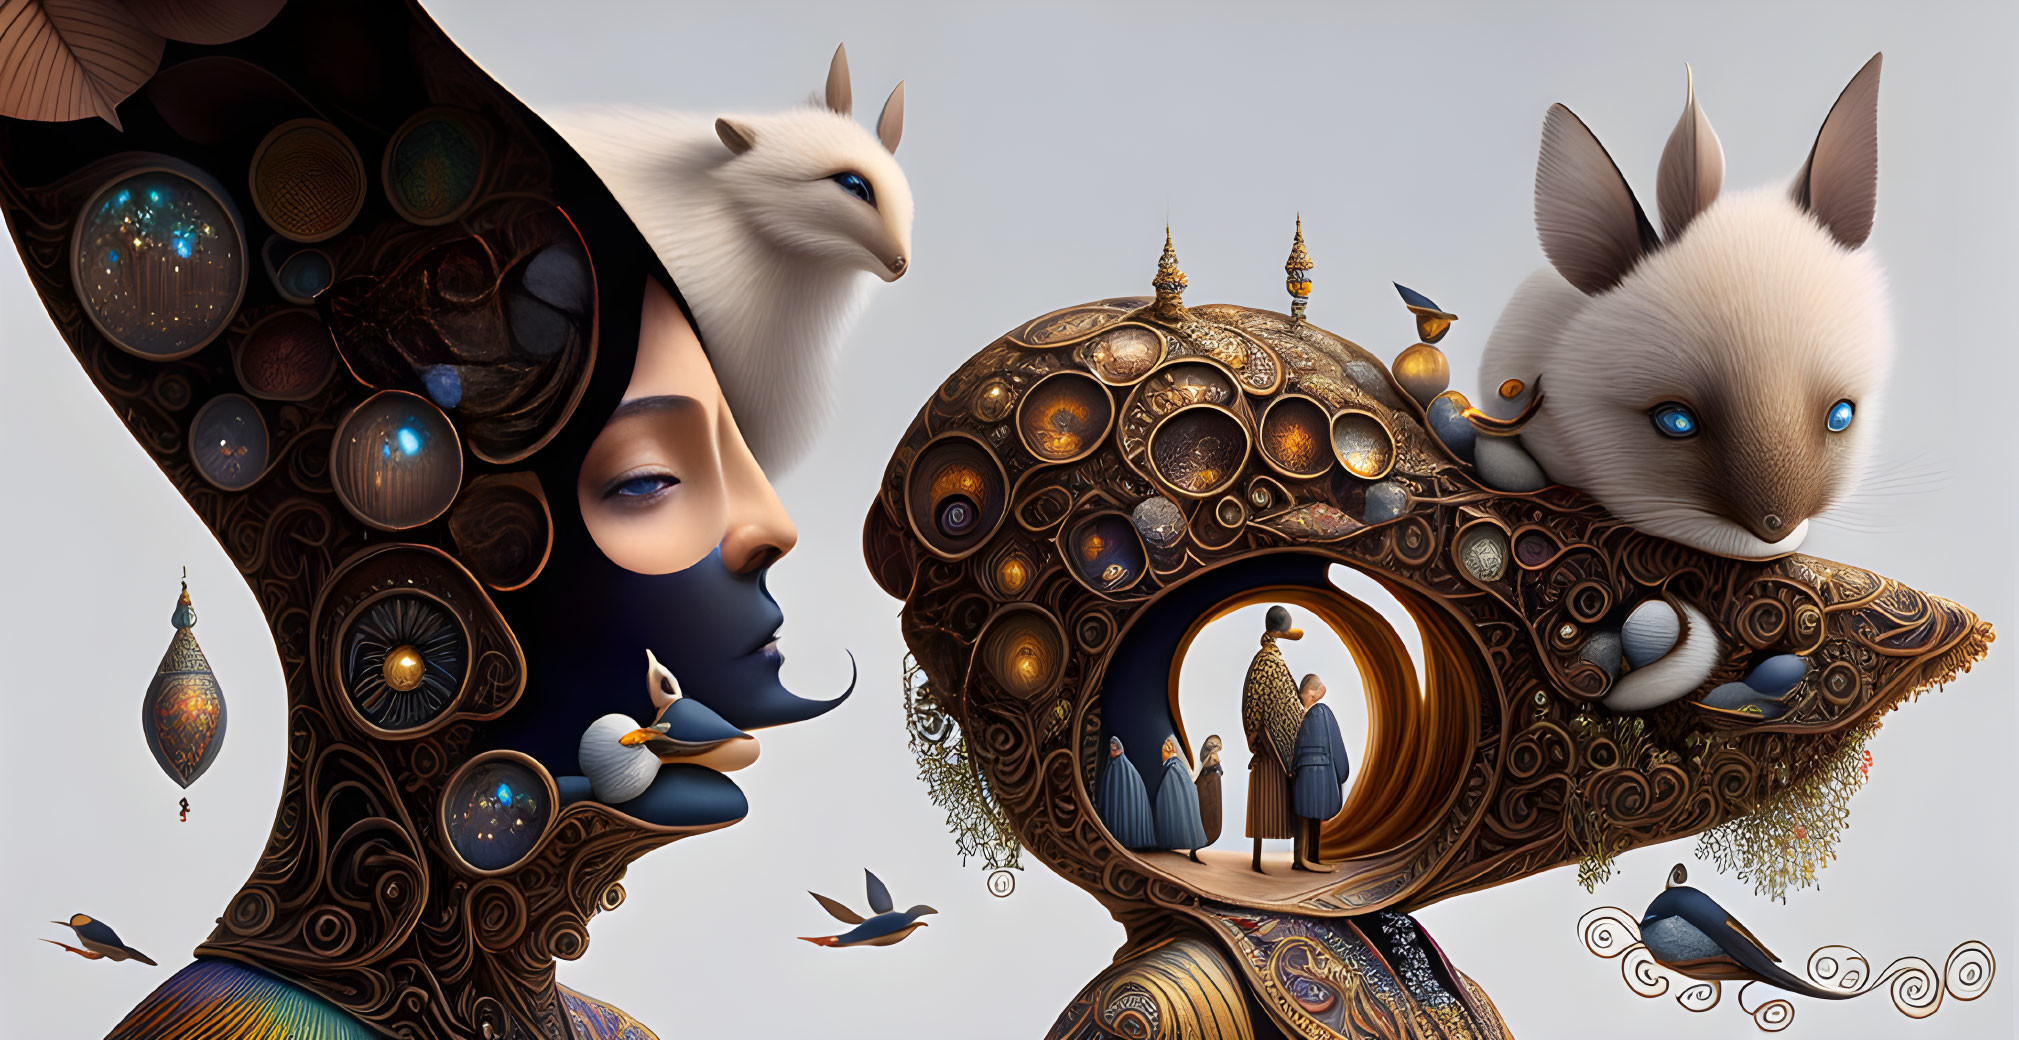 Ornate surreal artwork with cosmic and animal figures in circular portal